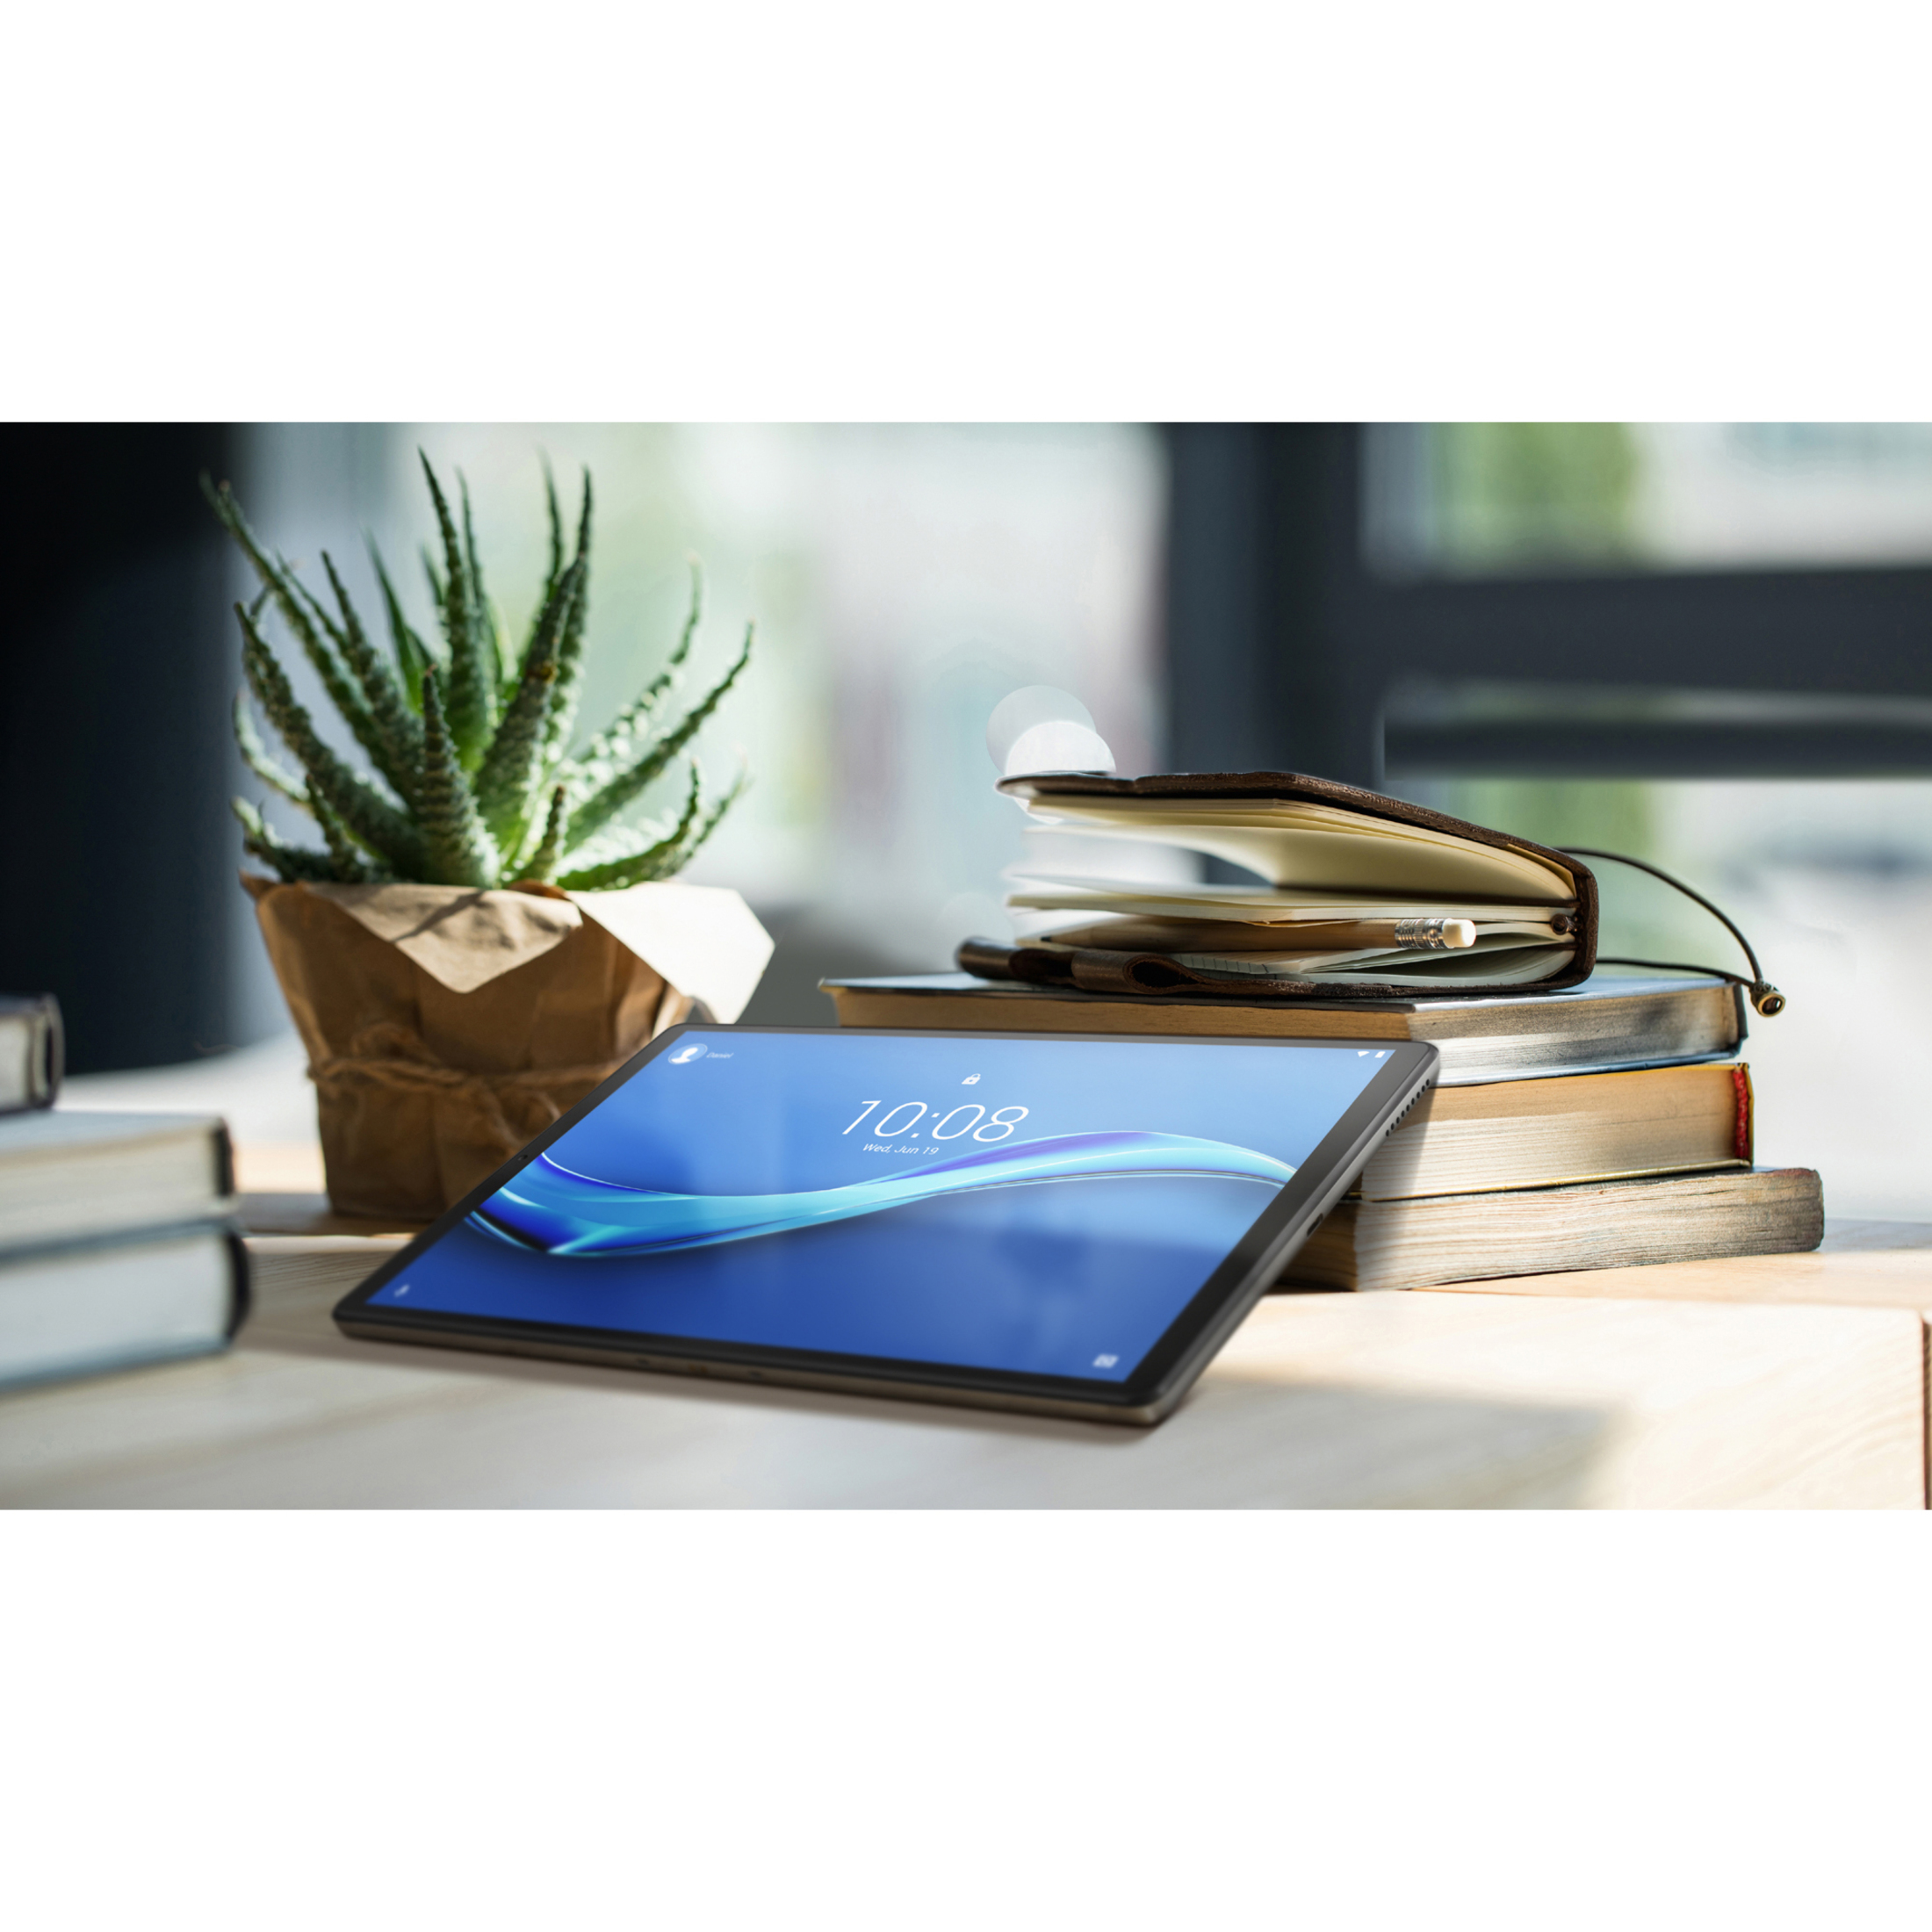 Lenovo Tab M10 10.3" Tablet - MediaTek Helio P22T - 4GB - 64GB FHD Plus with the Smart Charging Station - Android 9.0 (Pie) - image 31 of 33